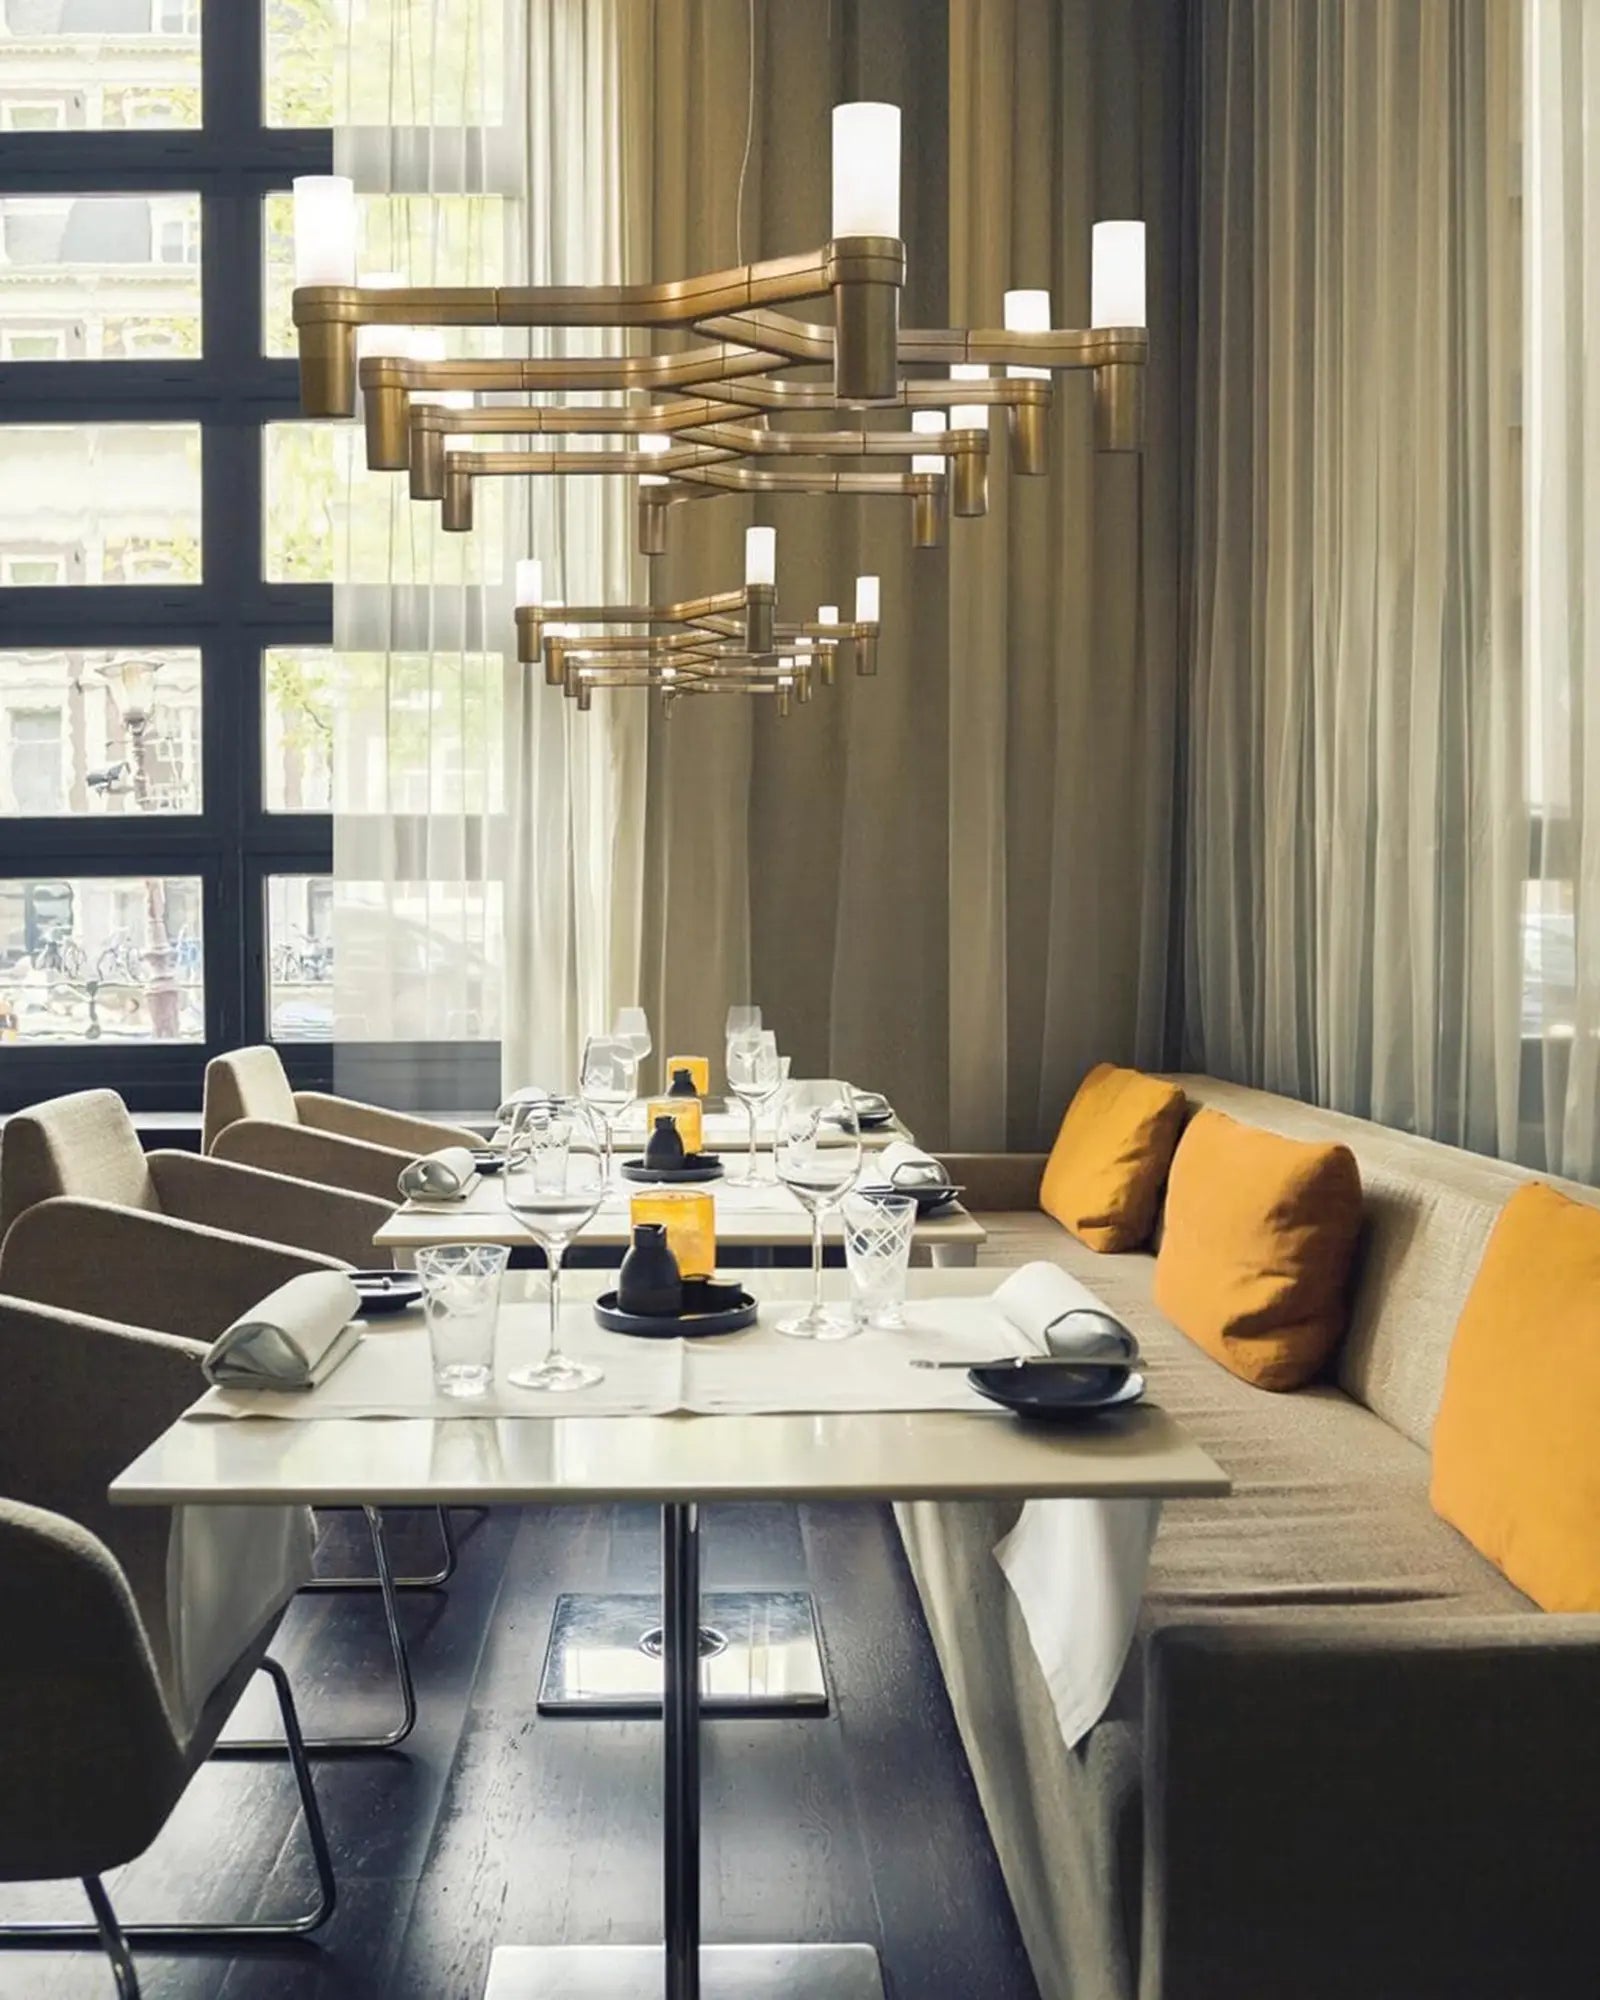 Crown plana long horizontal pendant light  cluster above dining tables in a restaurant